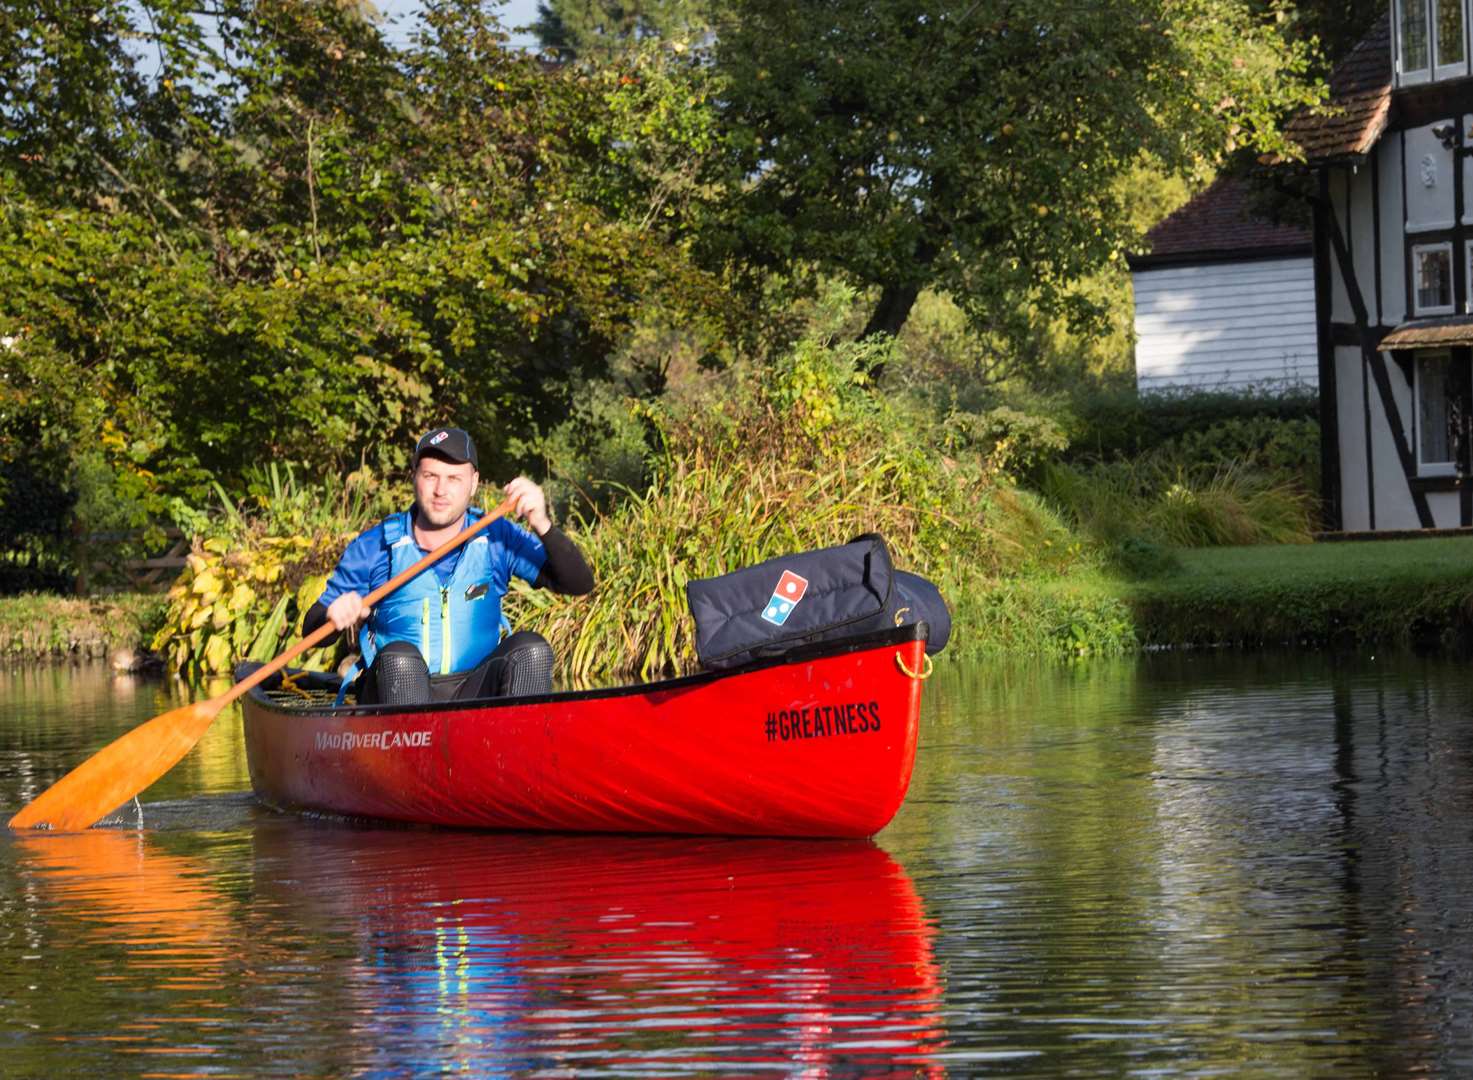 What happened when we tested out pizza delivery by canoe